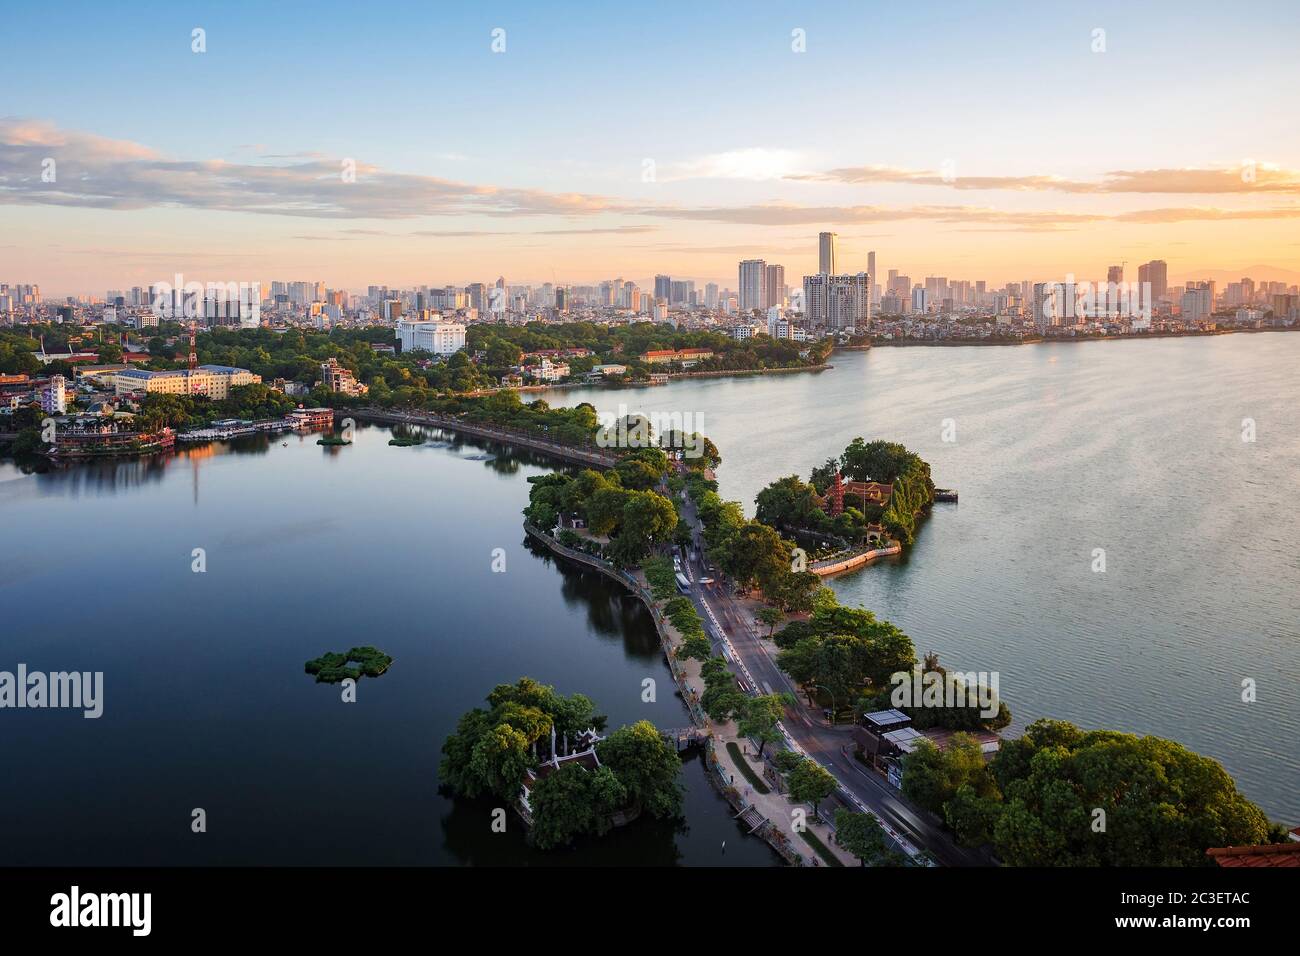 Aerial view of Hanoi skyline showing West Lake and Tay Ho District at sunset in Hanoi, Vietnam. Stock Photo